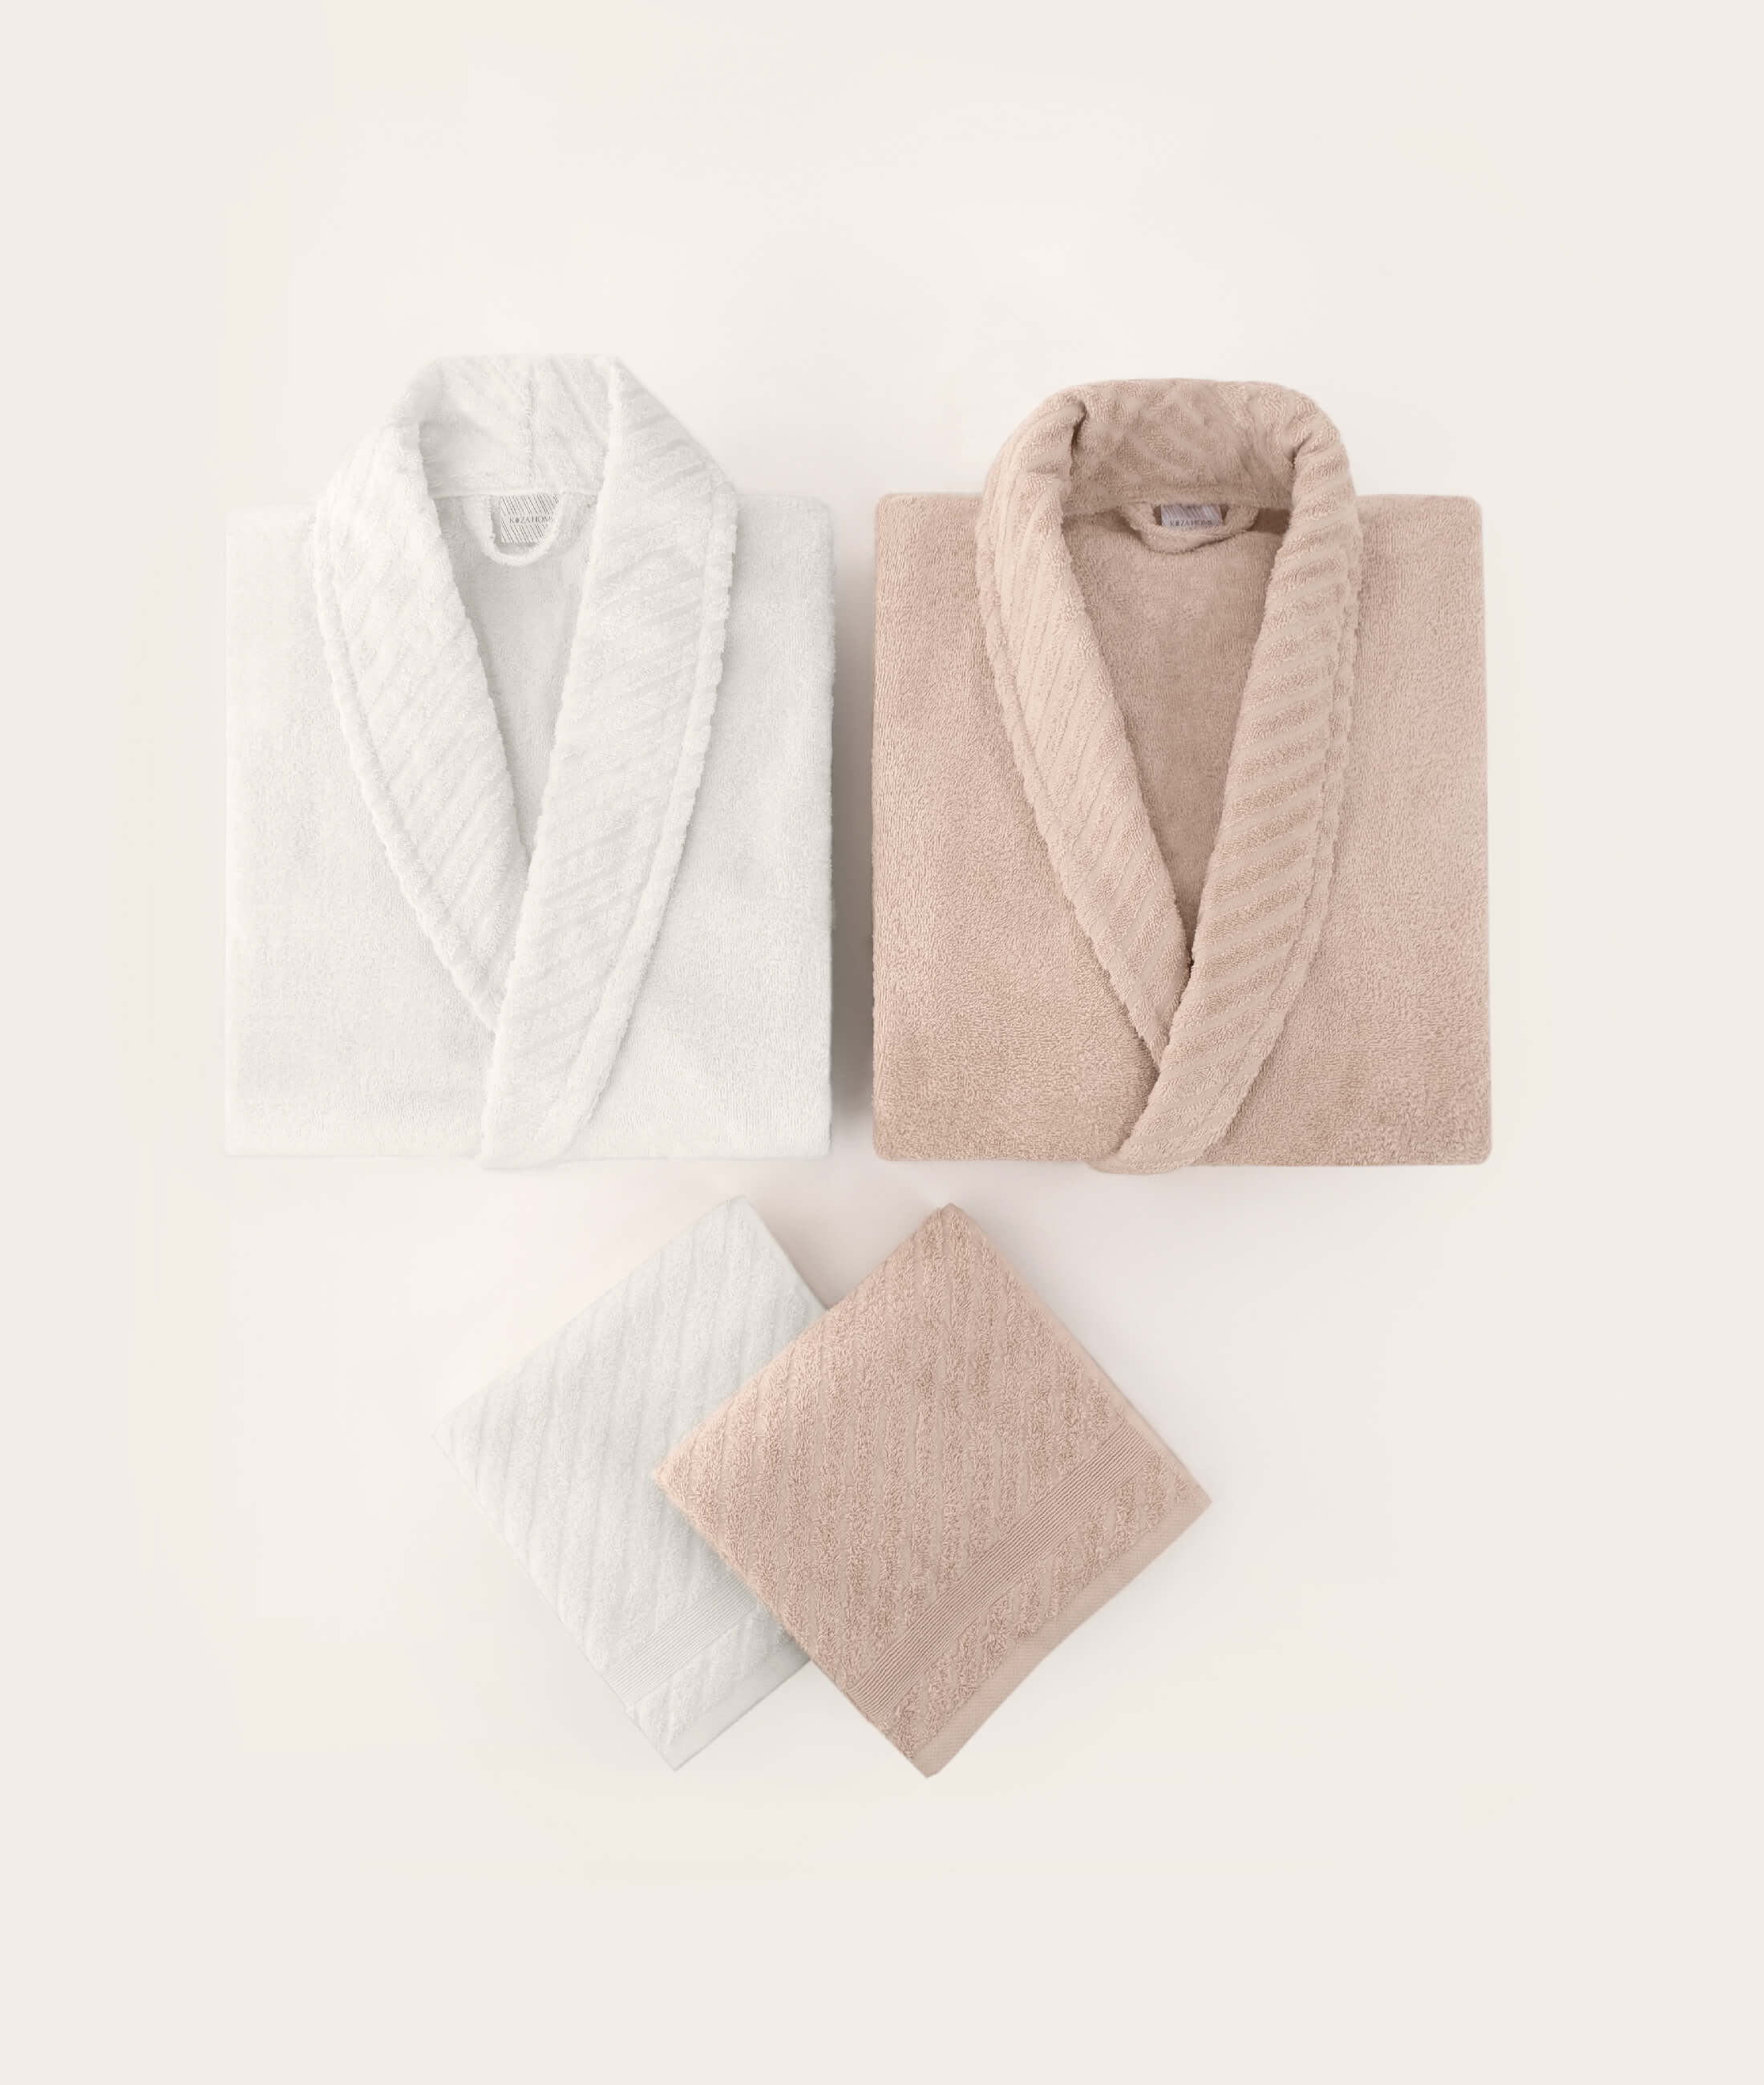 Lycian Salmon-White Family of 4 Bathrobes and Towel Set 2 Bathrobes 2 Towels 1063A